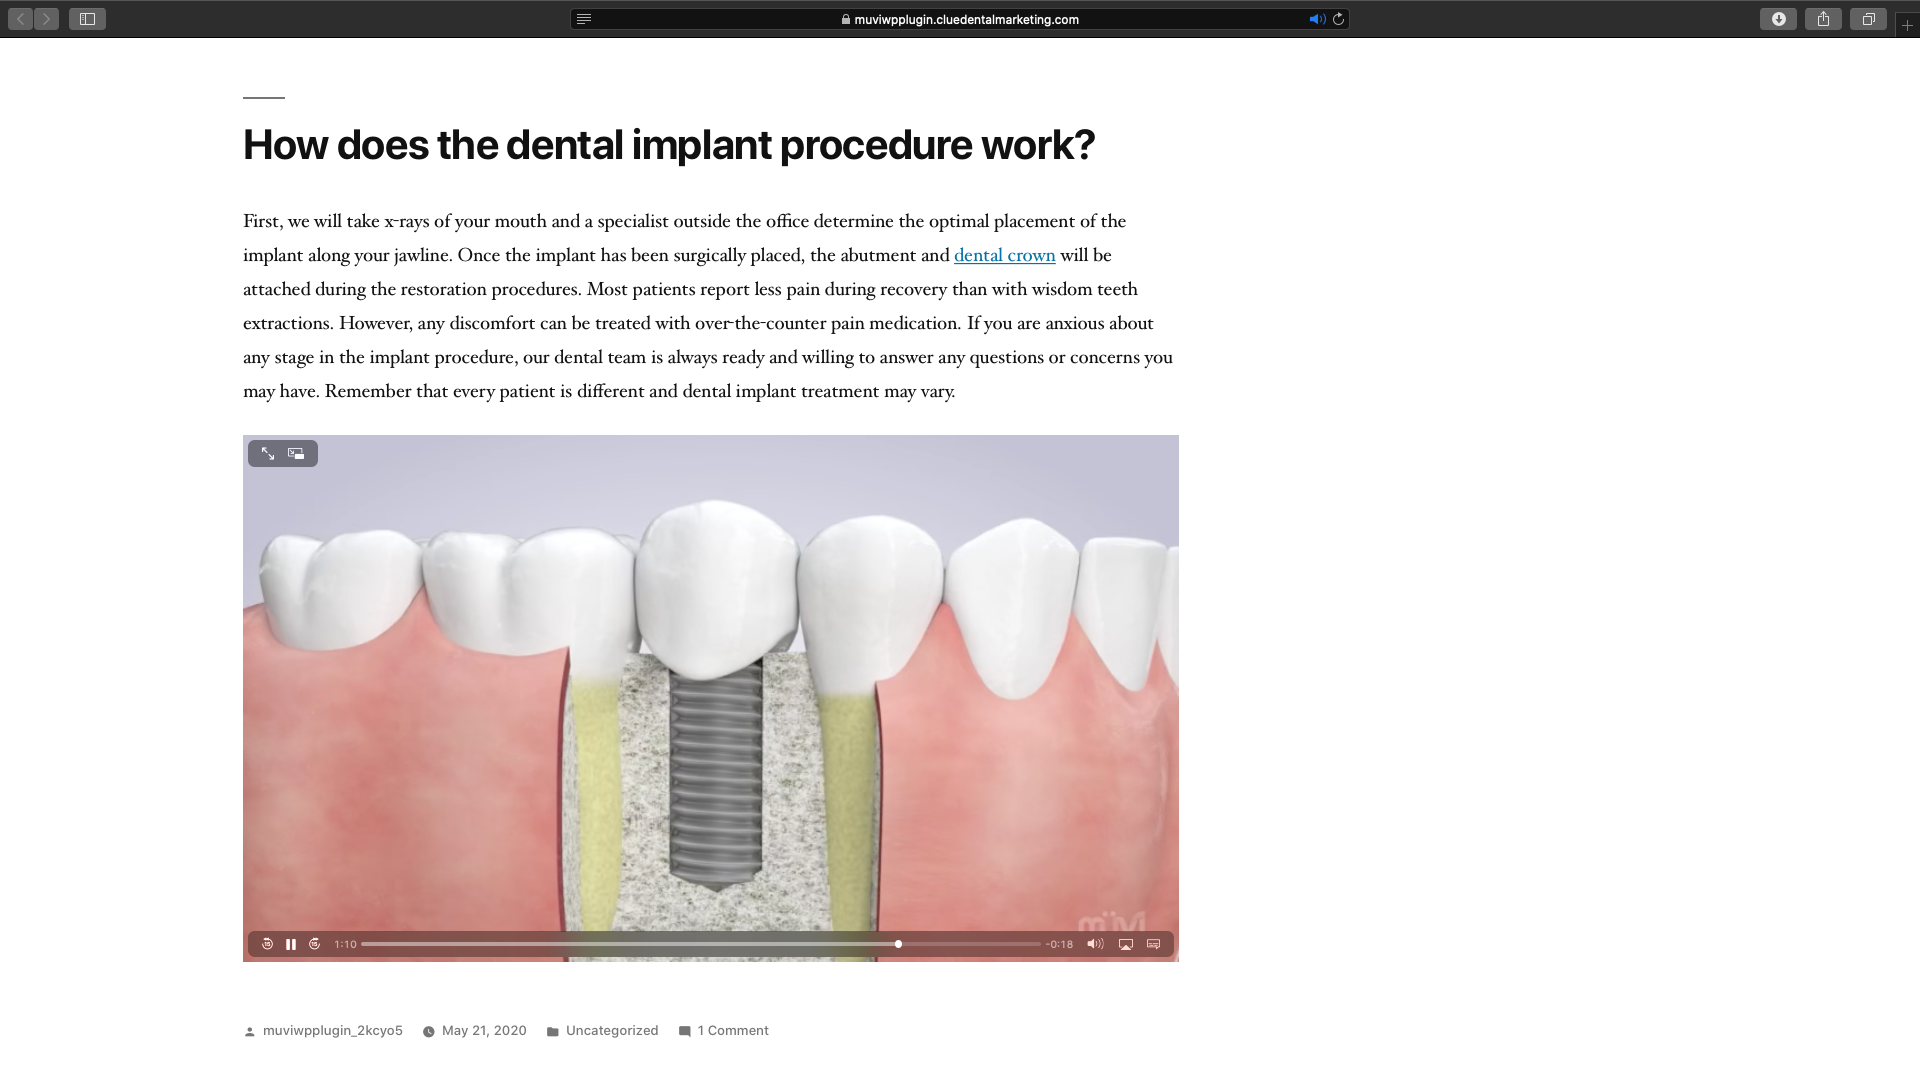 Easily add dental education videos to your posts and pages.